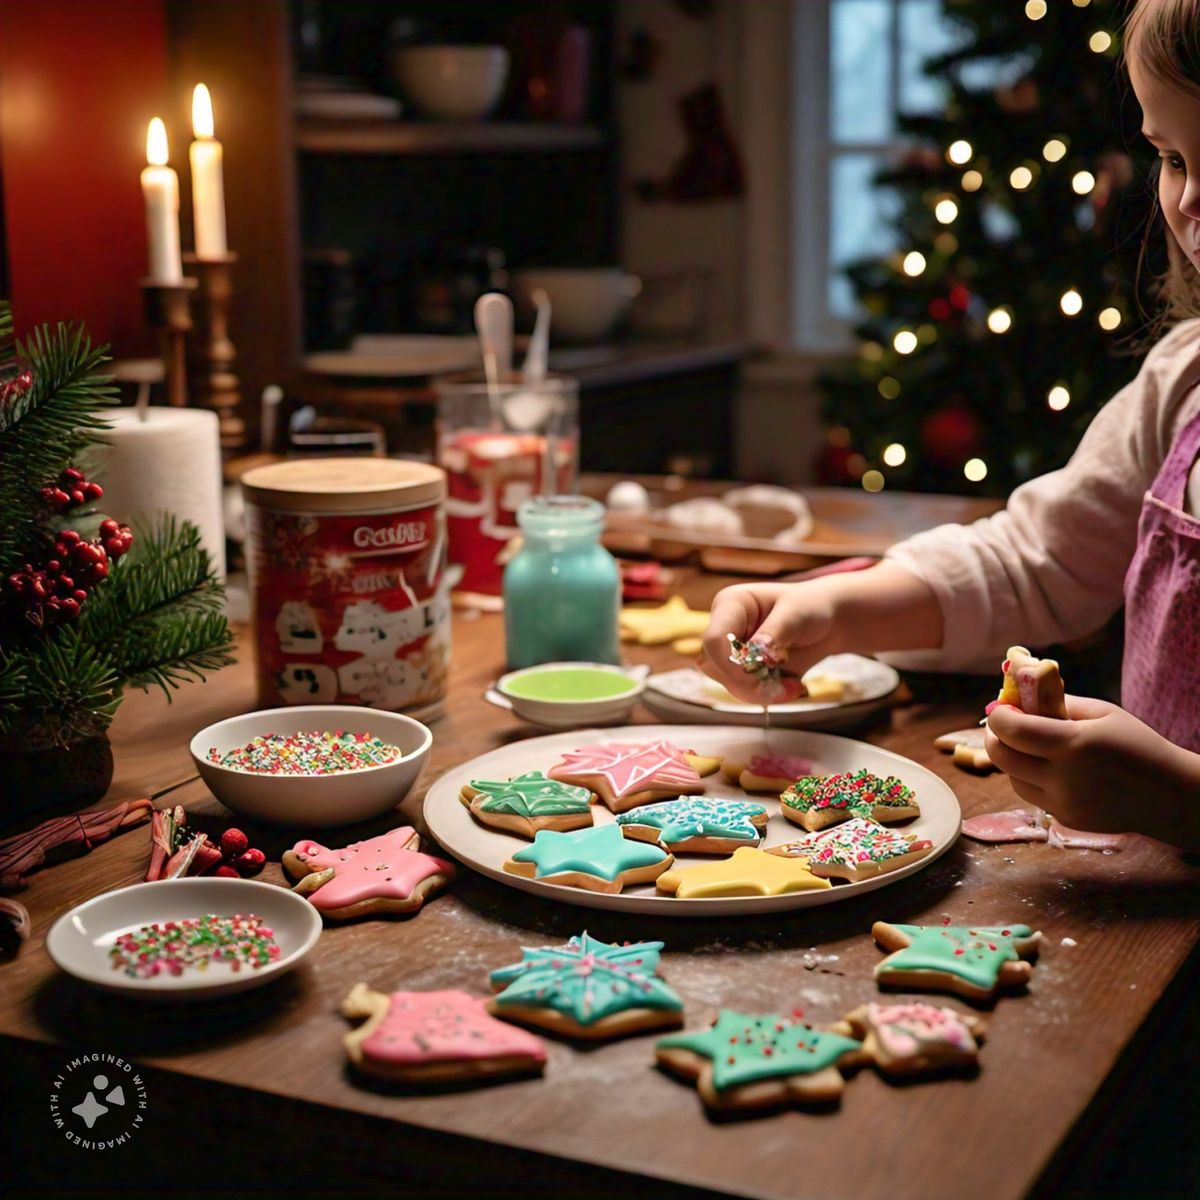 Cookie decorating with Rosie Acre Bakery